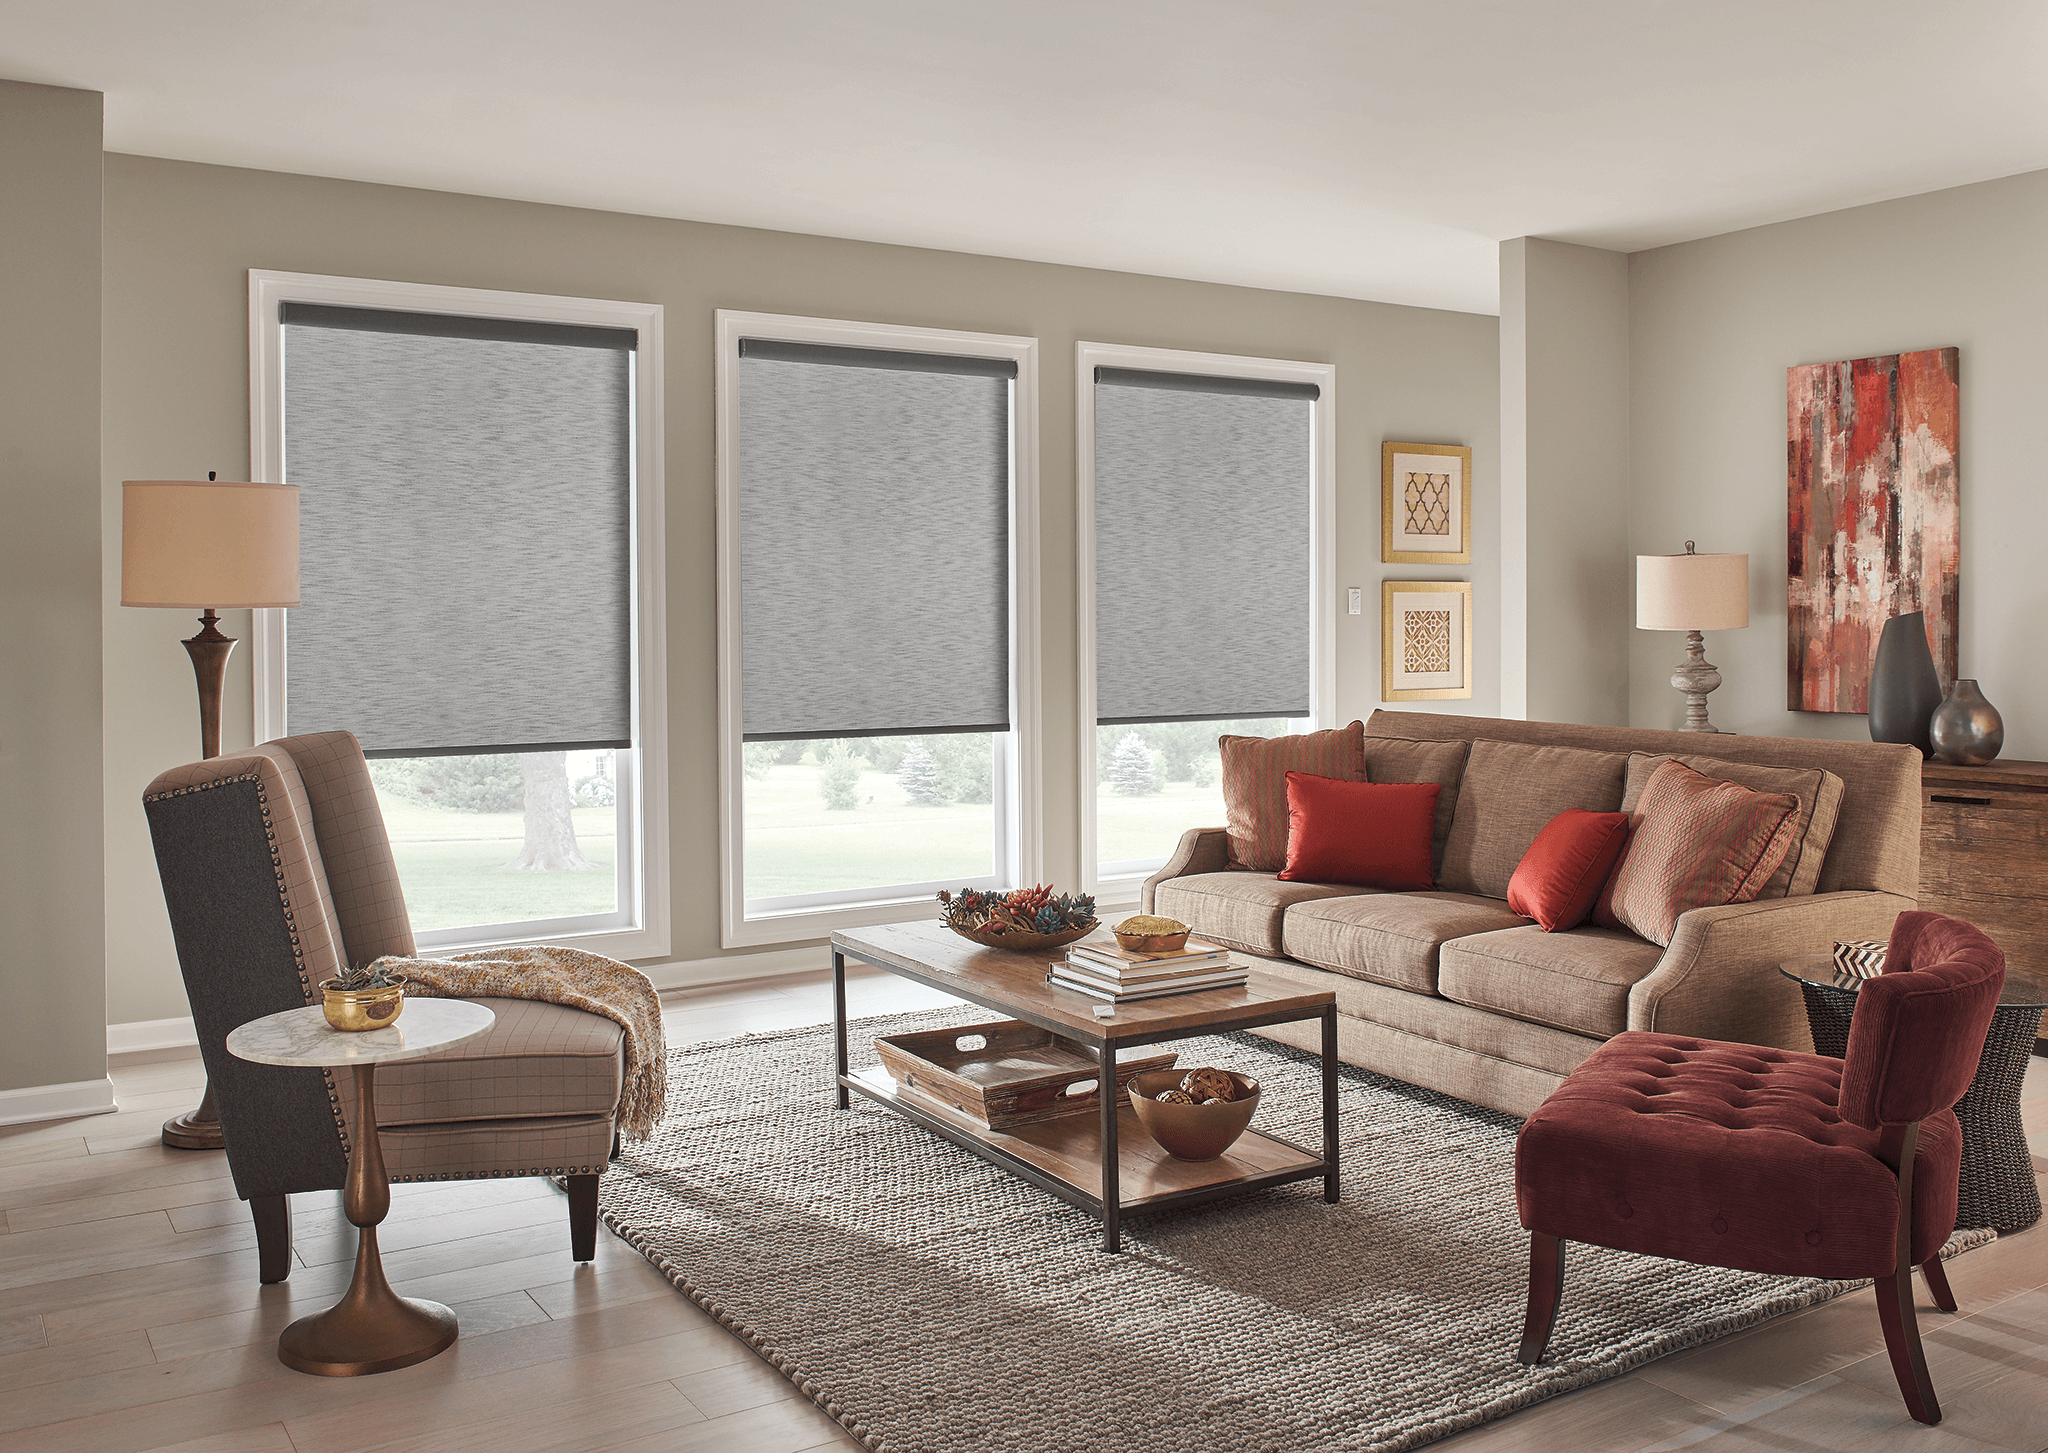 Shades for winter windows